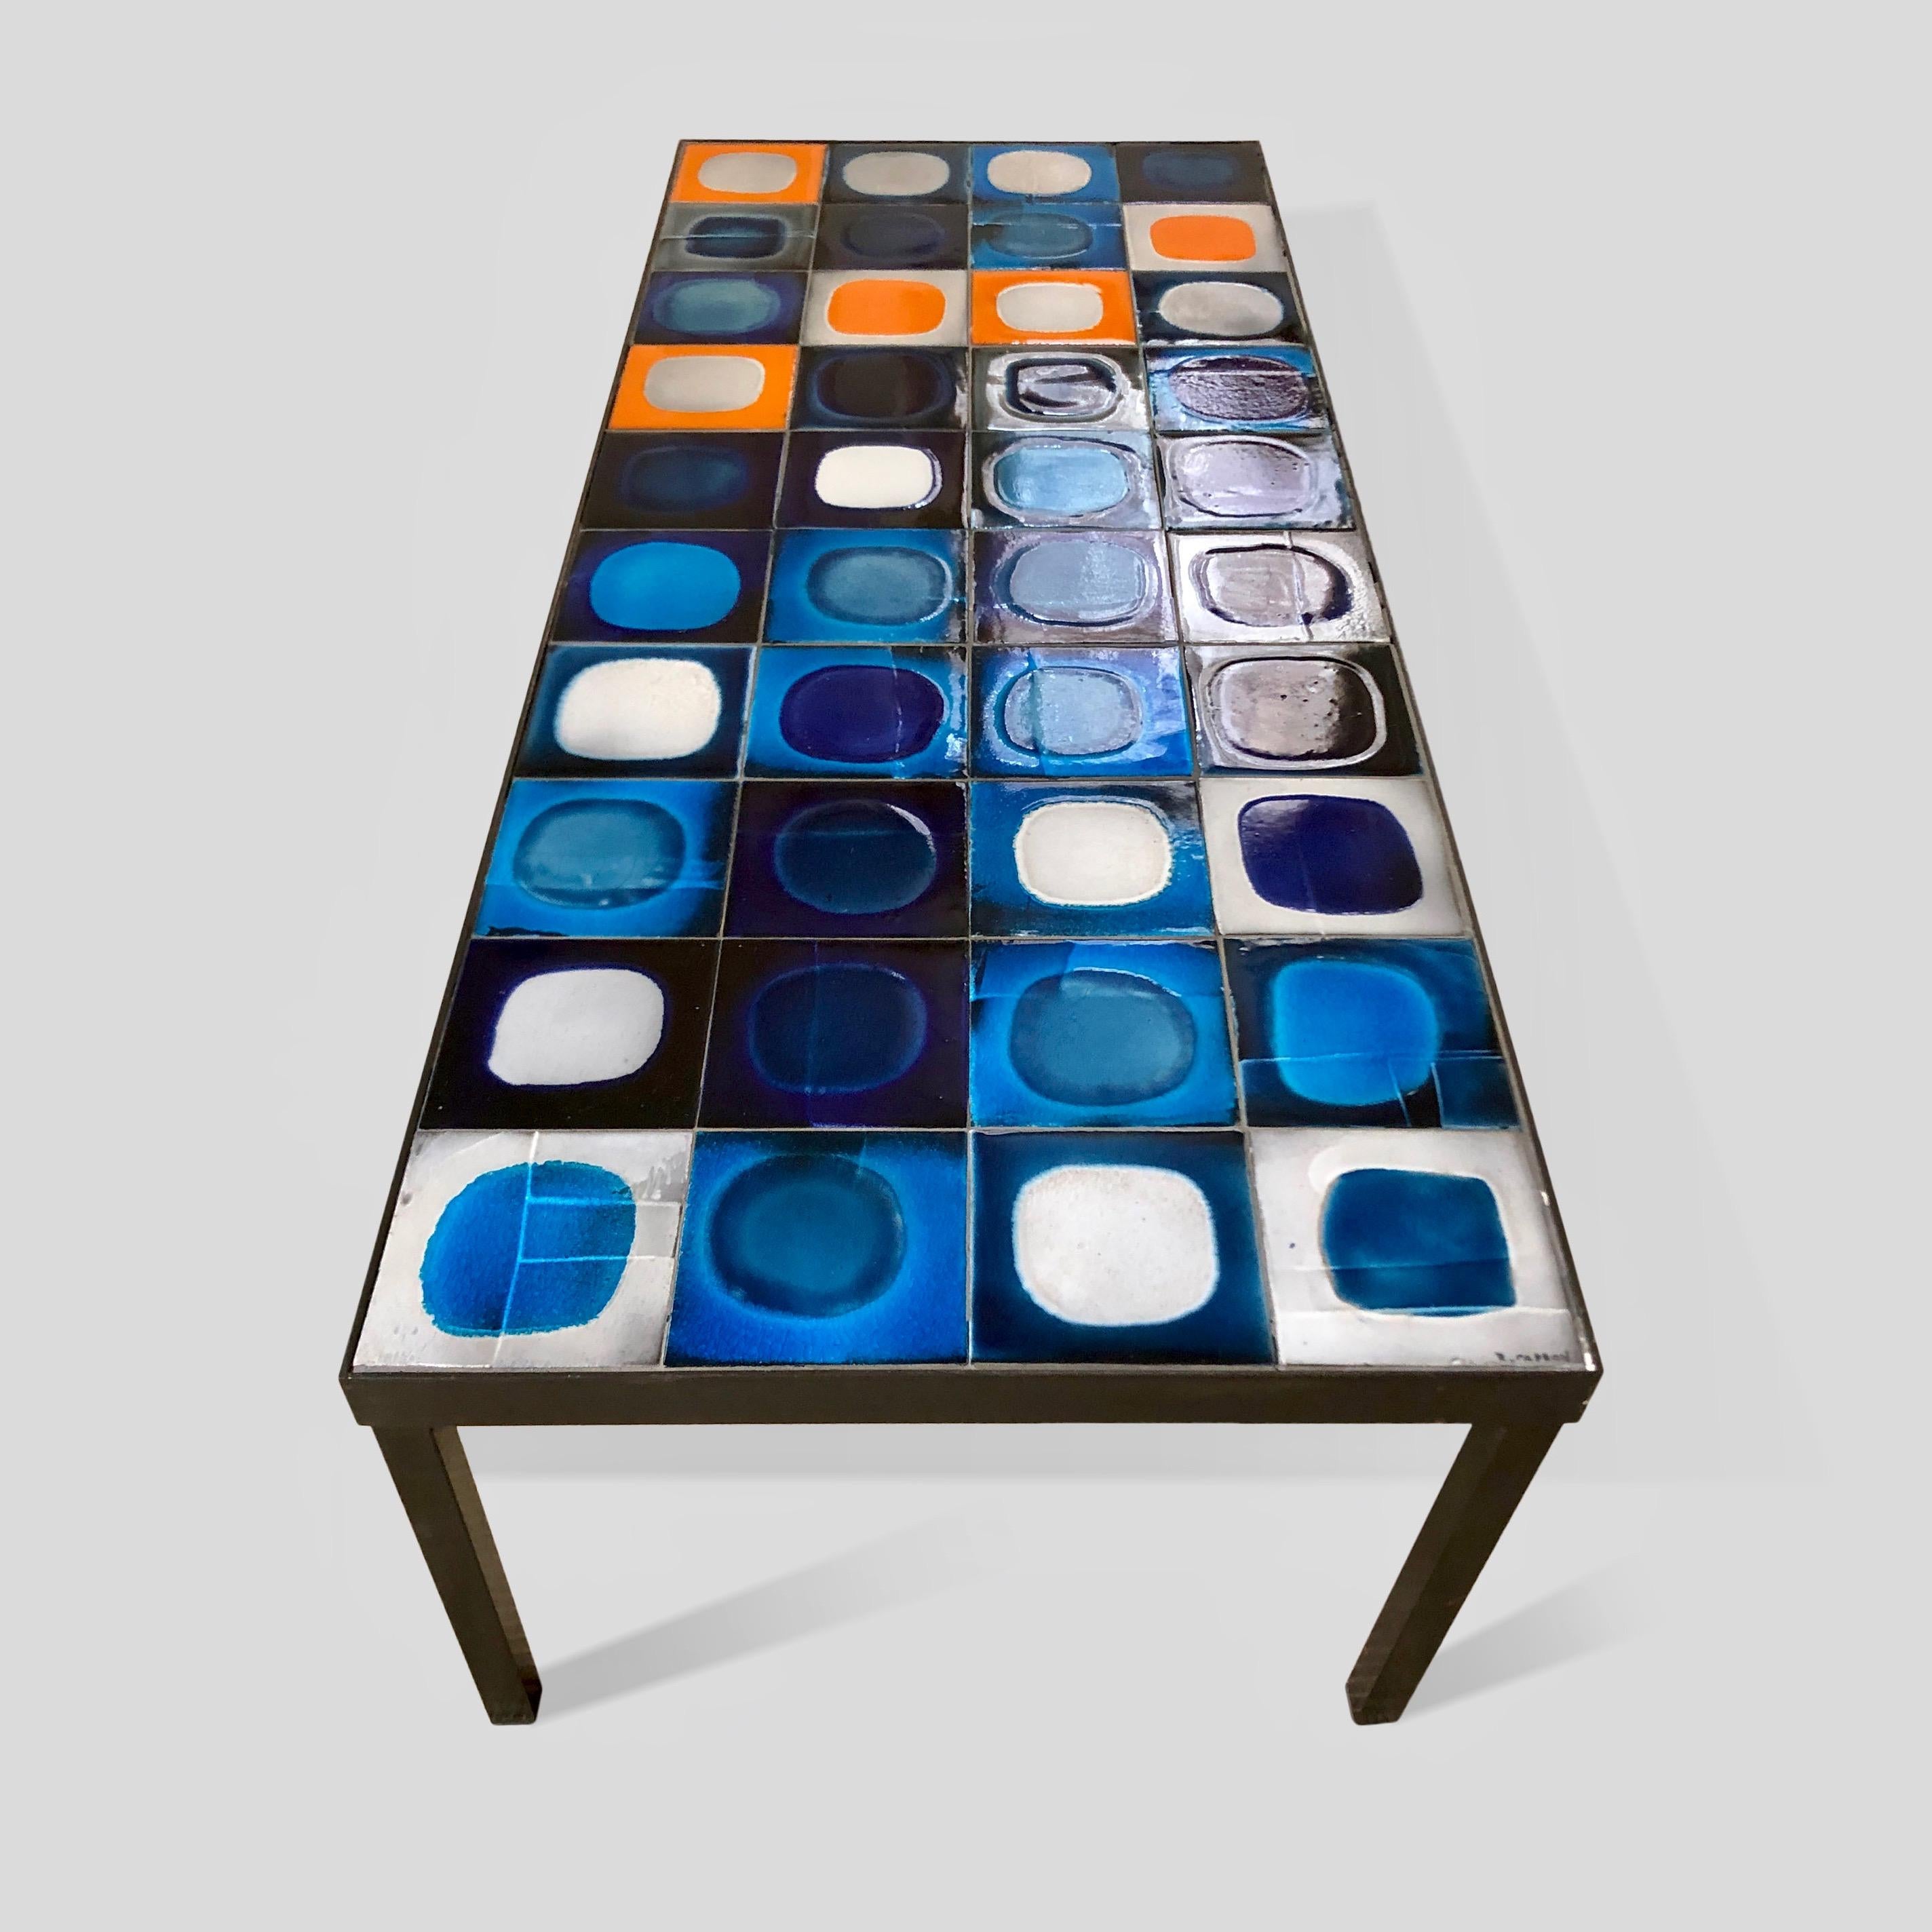 Metal Roger Capron, Ceramic Tile Coffee Table, Vallauris France